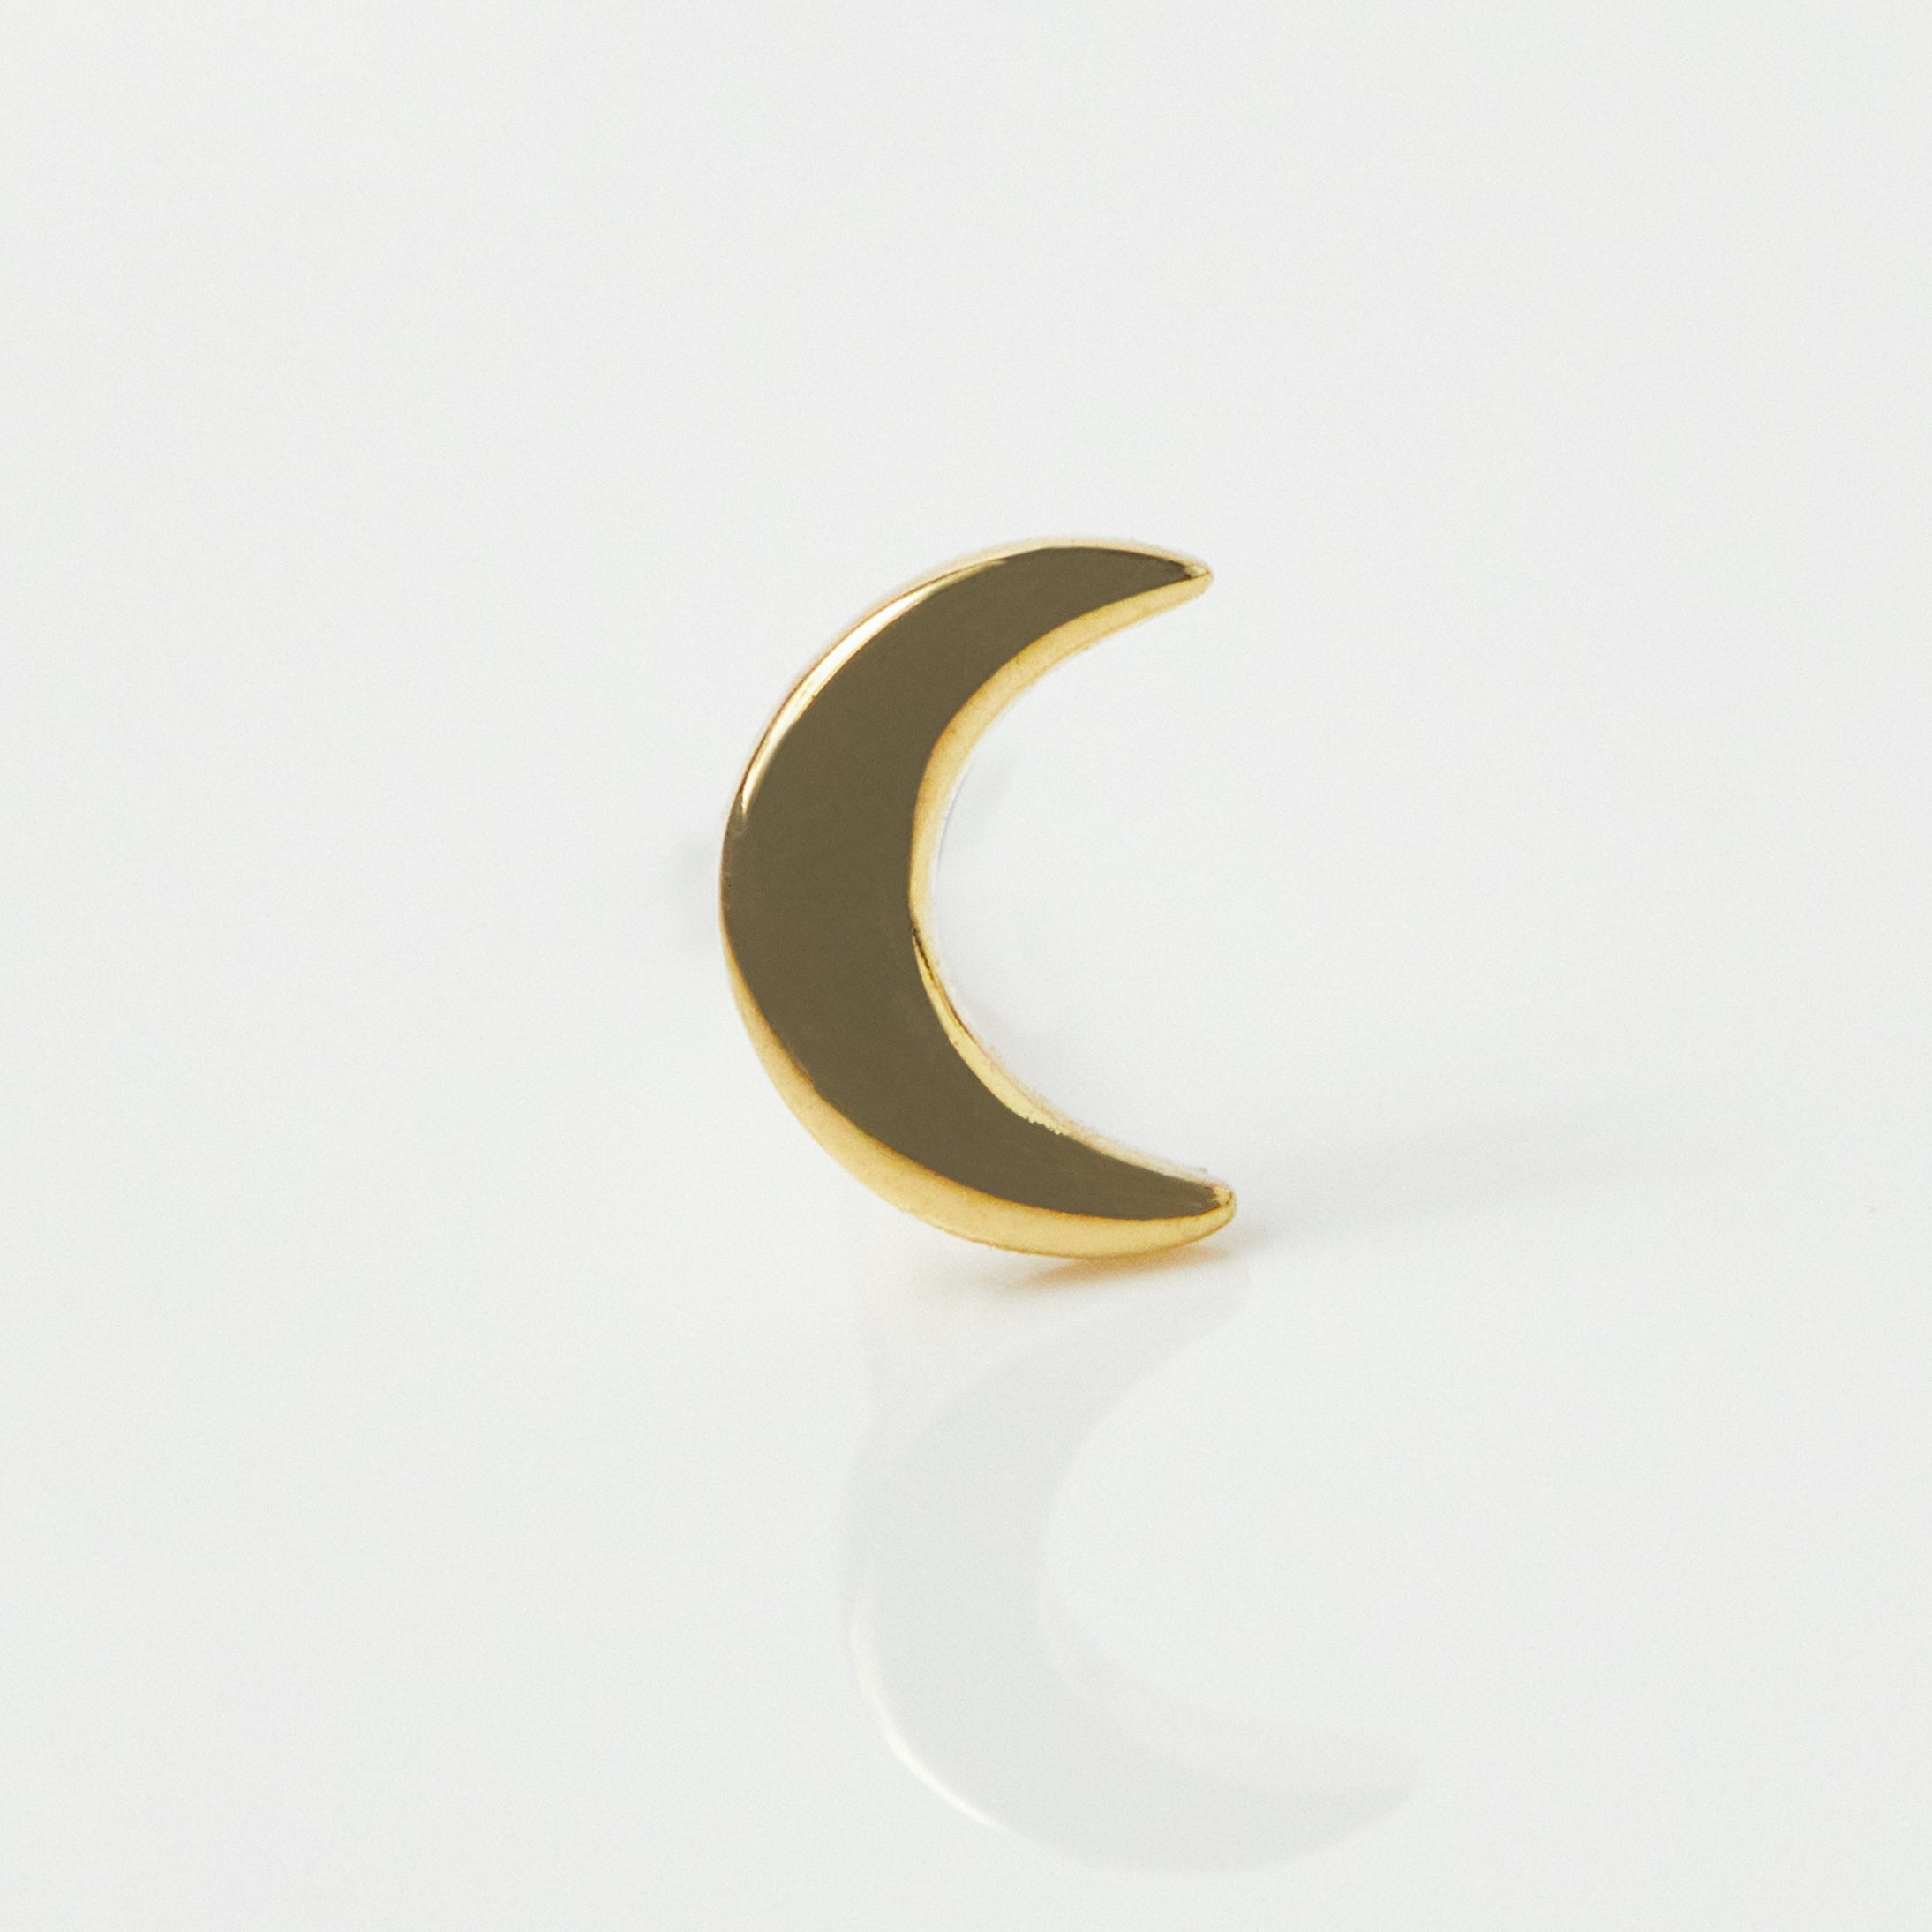 Share 249+ gold crescent moon earrings latest